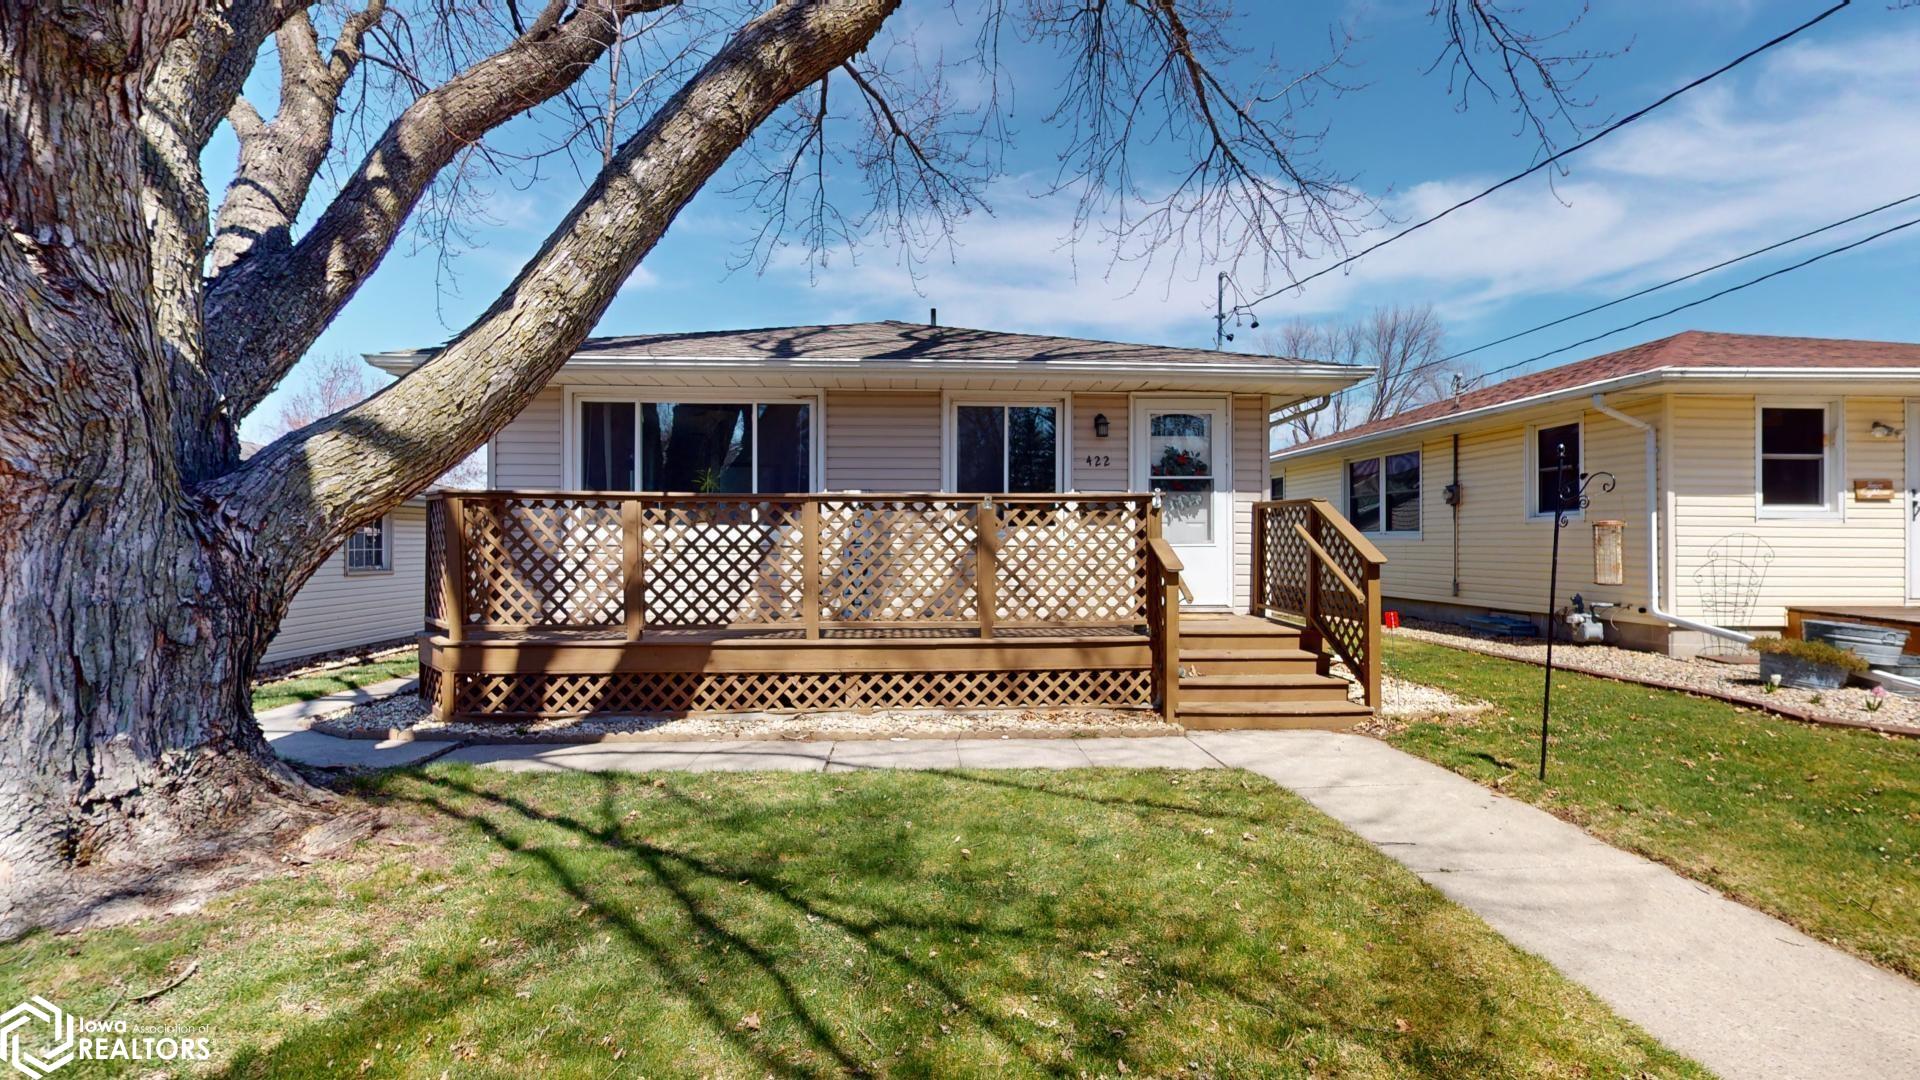 422 28th, Mason City, Iowa 50401, 3 Bedrooms Bedrooms, ,1 BathroomBathrooms,Single Family,For Sale,28th,6316350